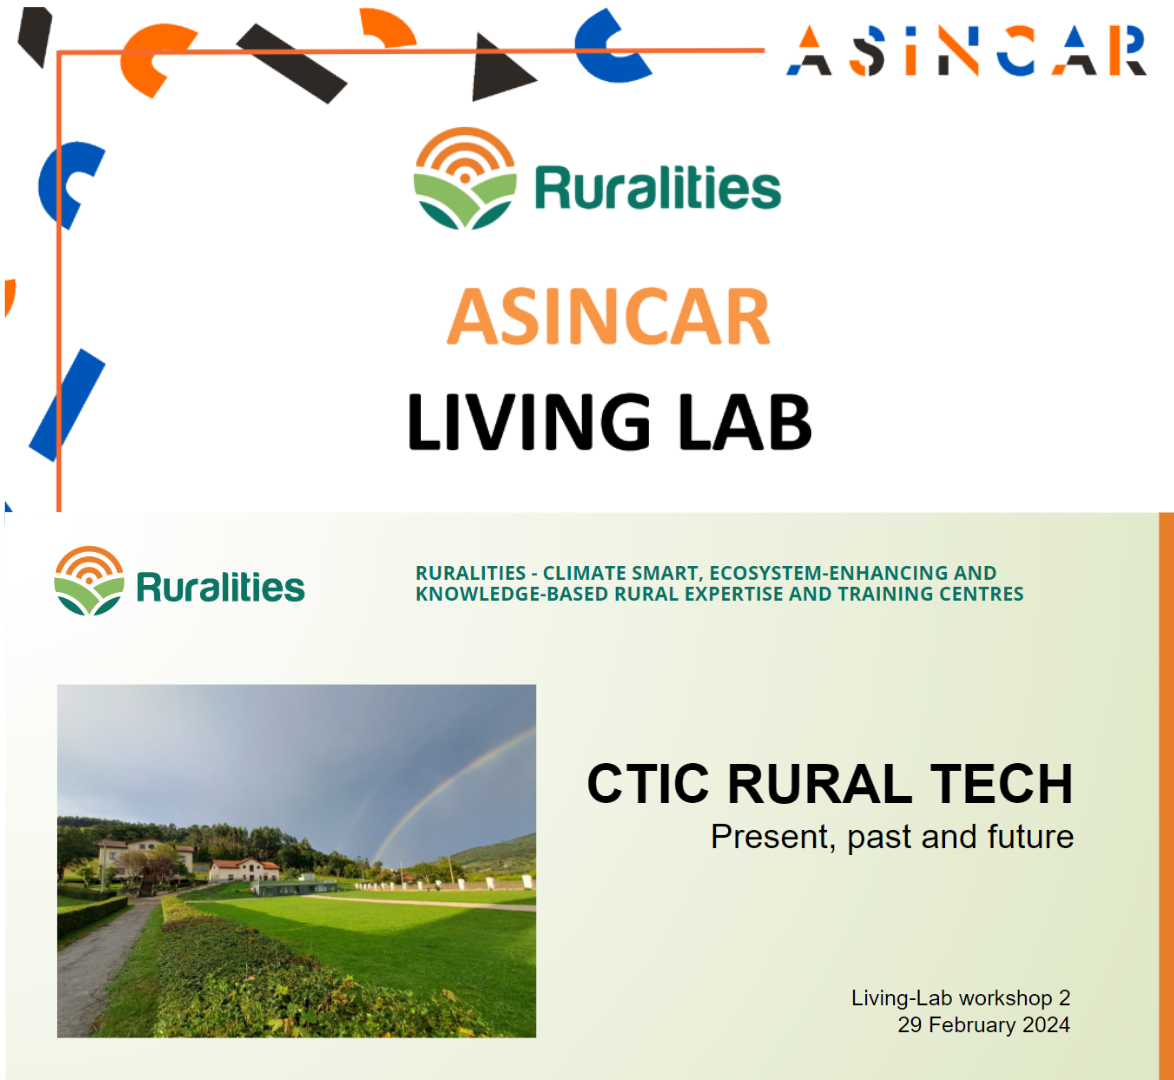 Recap of the Second Online Living Labs Workshop on Asturias Living Labs